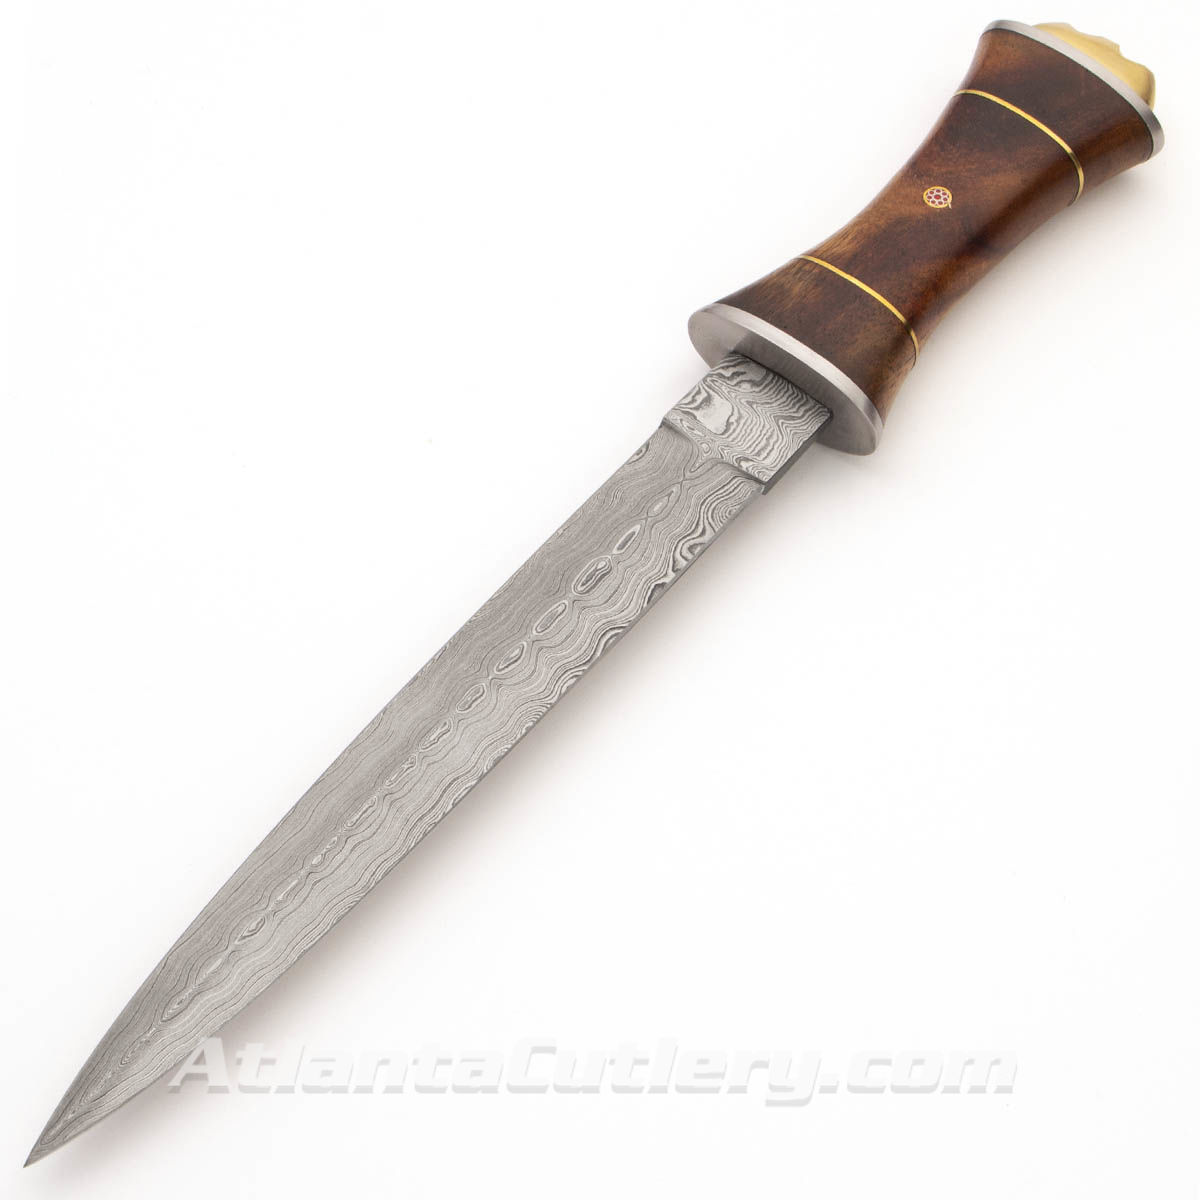 Royal Damascus Dagger has large burlwood grip with brass spacers and a mosaic rivet, and brass pommel with crown